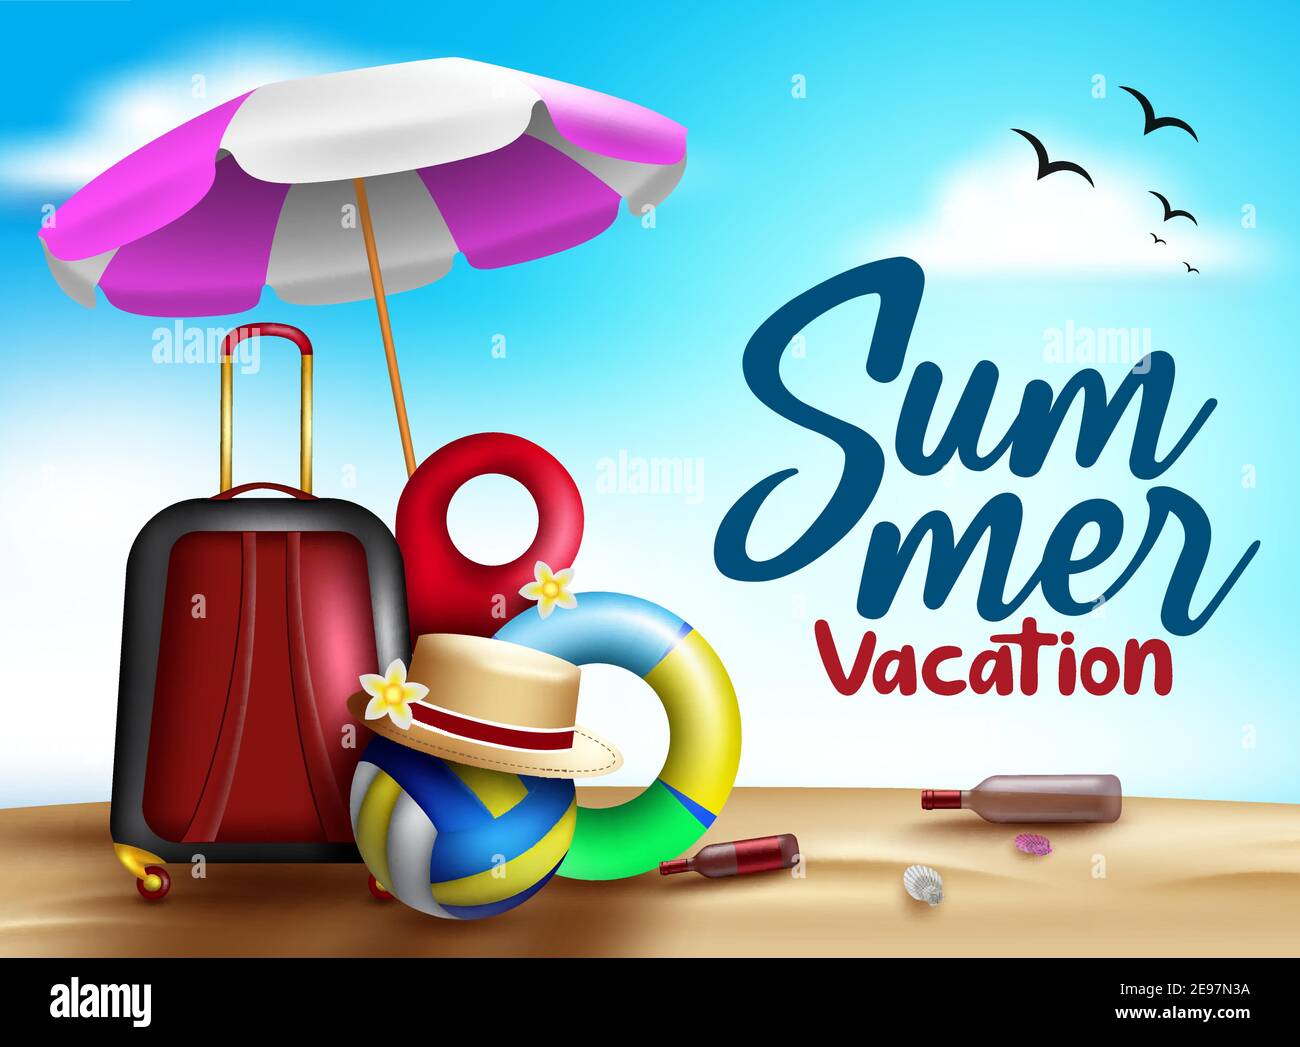 Summer vacation vector banner design. Summer vacation text in blue sky background with luggage travel bag and volleyball elements for fun outdoor. Stock Vector